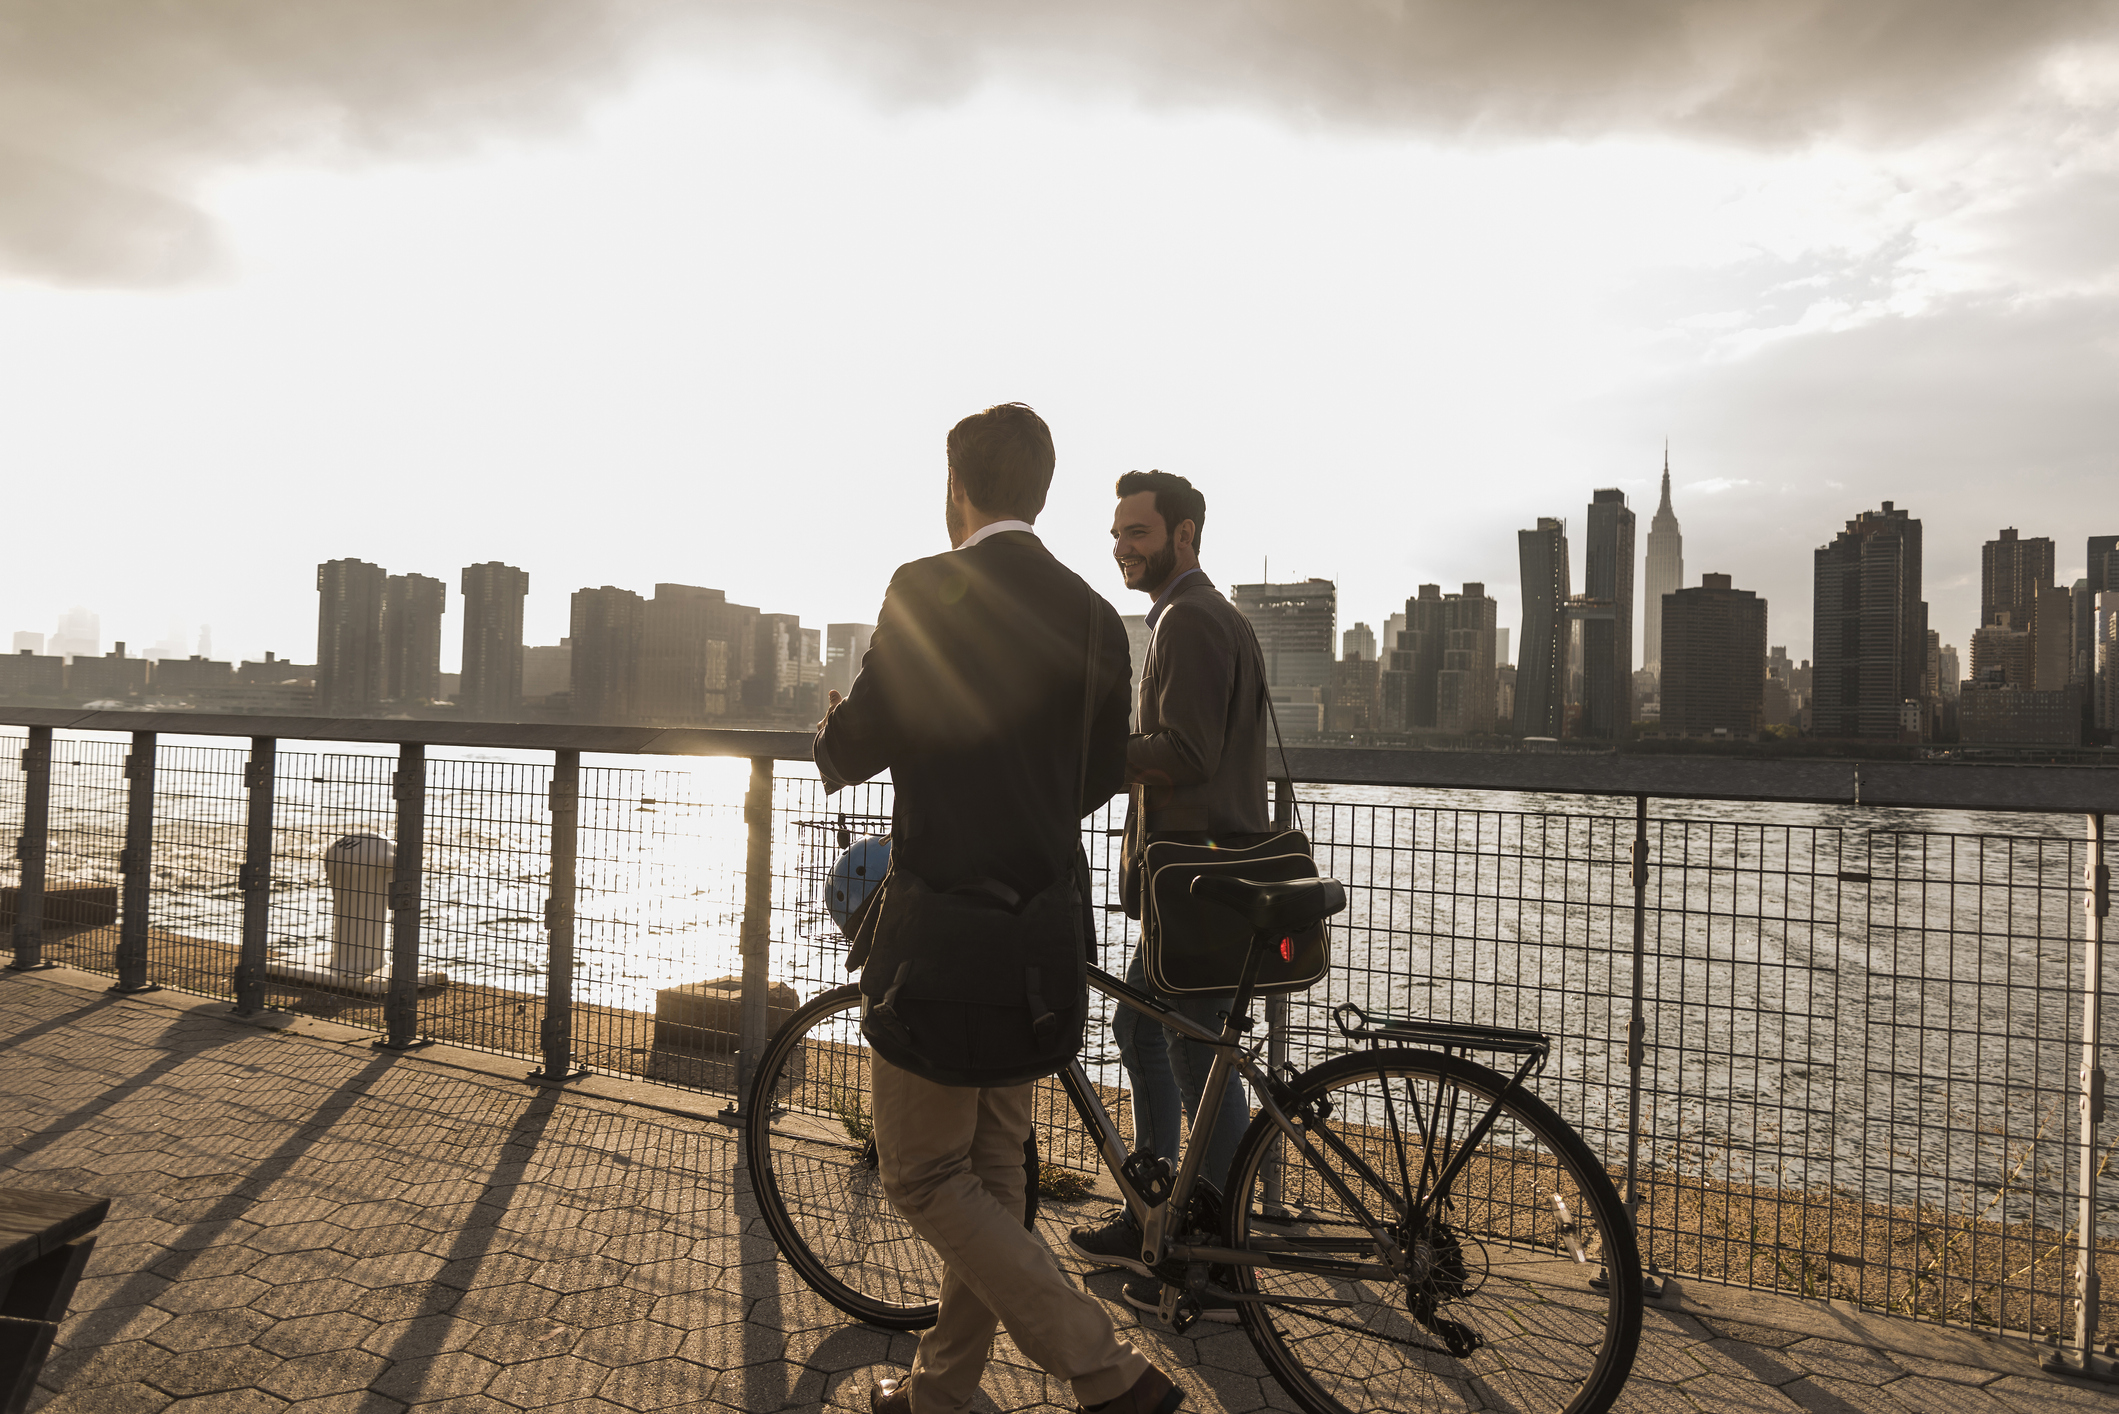 Two people standing next to a bike in front of a city.